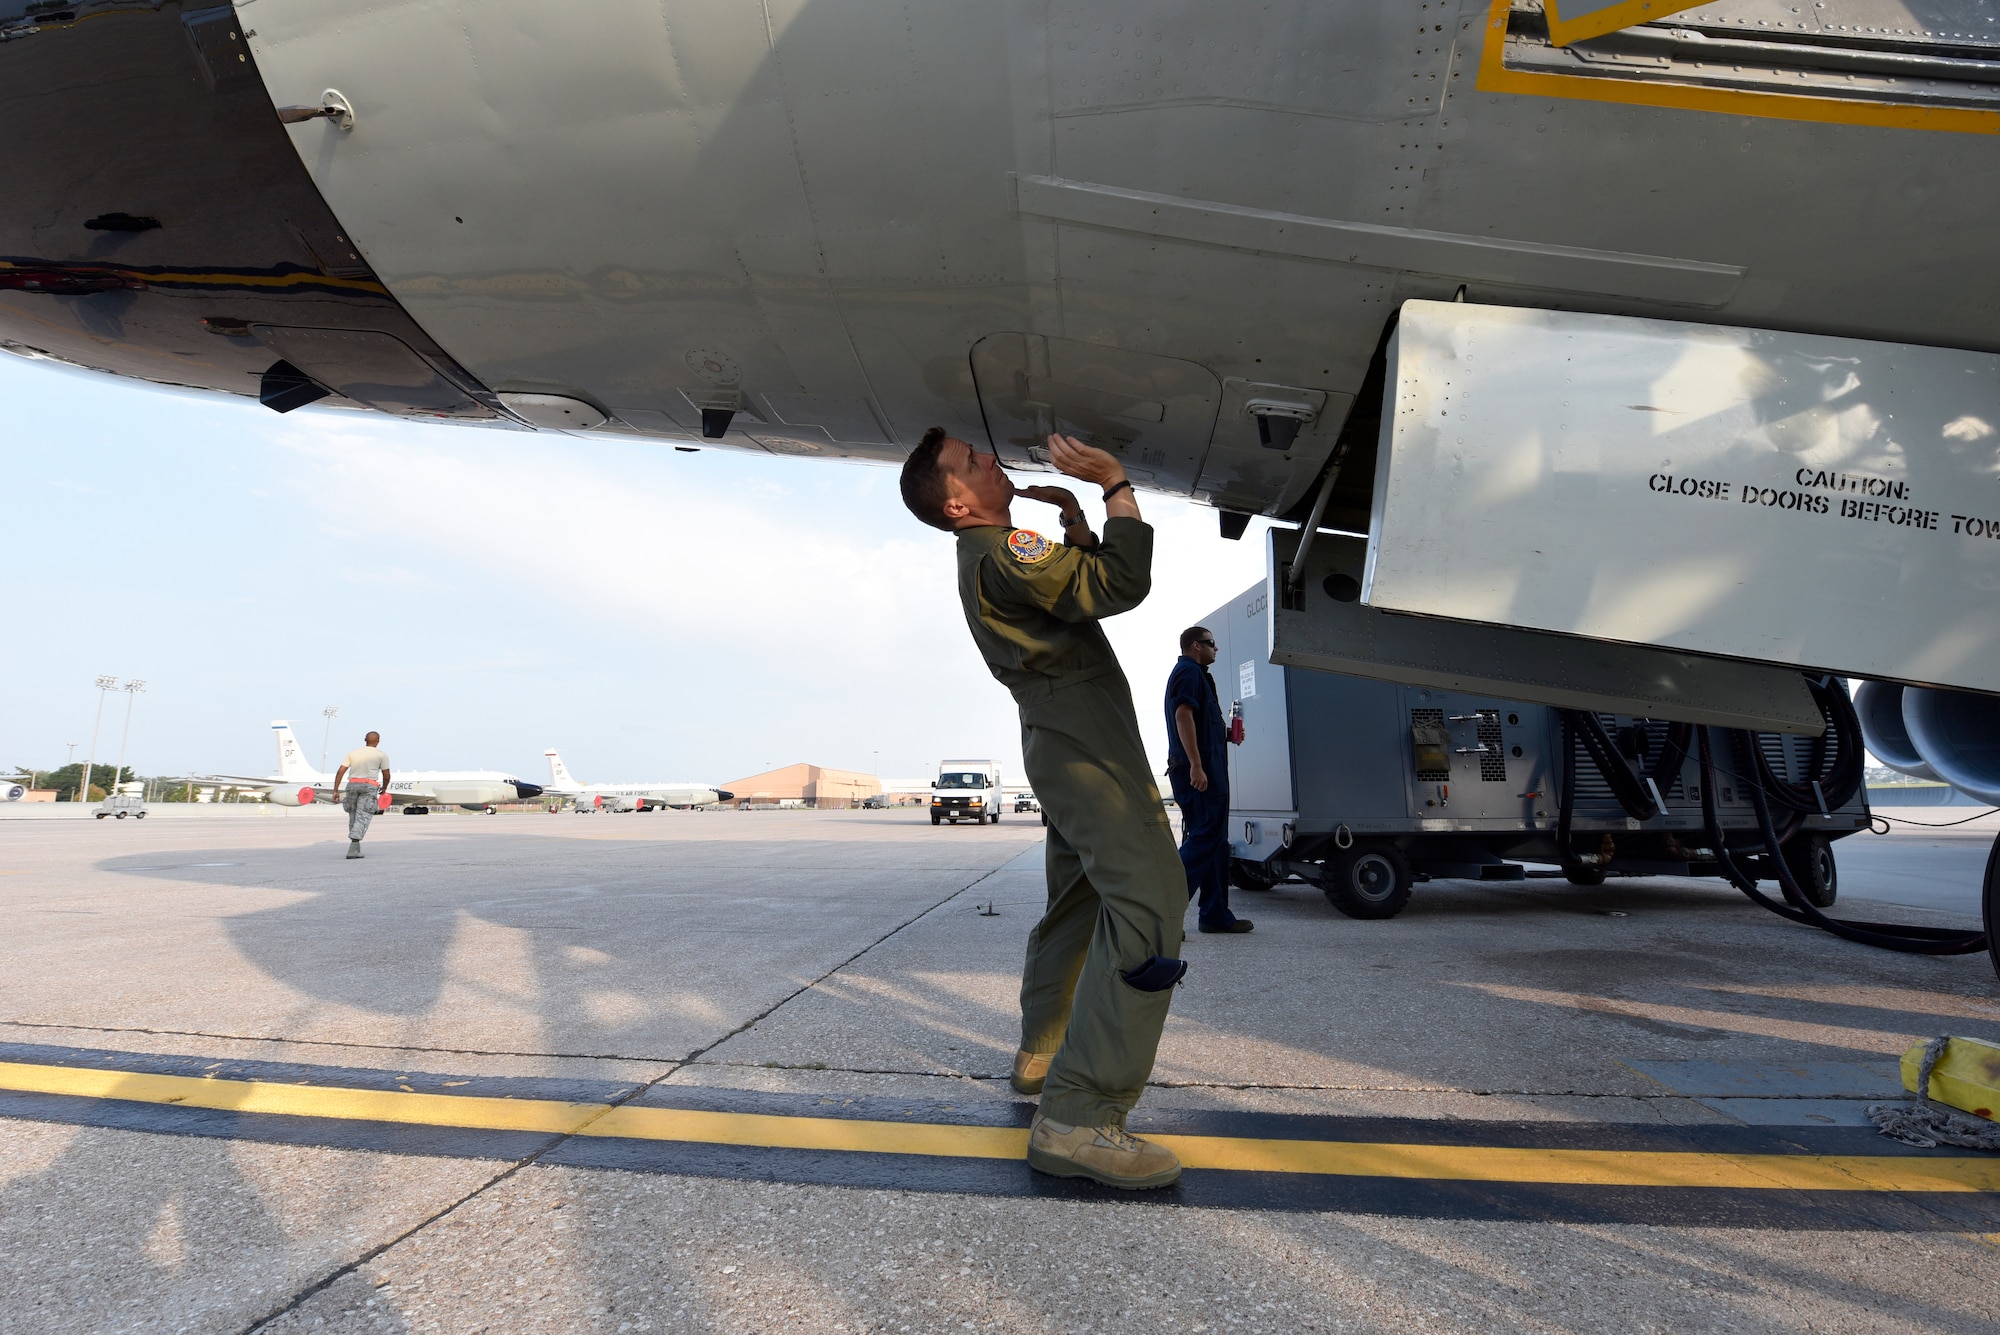 Nebraska National Guard Lt. Col. Mike Holdcroft, 170th Operational Support Squadron commander, conducts a preflight inspection of a RC-135V/W Rivet Joint Aug. 5, 2018 at Offutt Air Force Base, Nebraska. Holdcroft was the aircraft commander of a unique training sortie with a flight and mission-crew comprised almost exclusively of reserve component Airmen. The aircraft is an extensively modified C-135. The Rivet Joint's modifications are primarily related to its on-board sensor suite, which allows the mission crew to detect, identify and geolocate signals throughout the electromagnetic spectrum. The mission crew can then forward gathered information in a variety of formats to a wide range of consumers via Rivet Joint's extensive communications suite. (U.S. Air Force photo by 2nd Lt. Drew Nystrom)